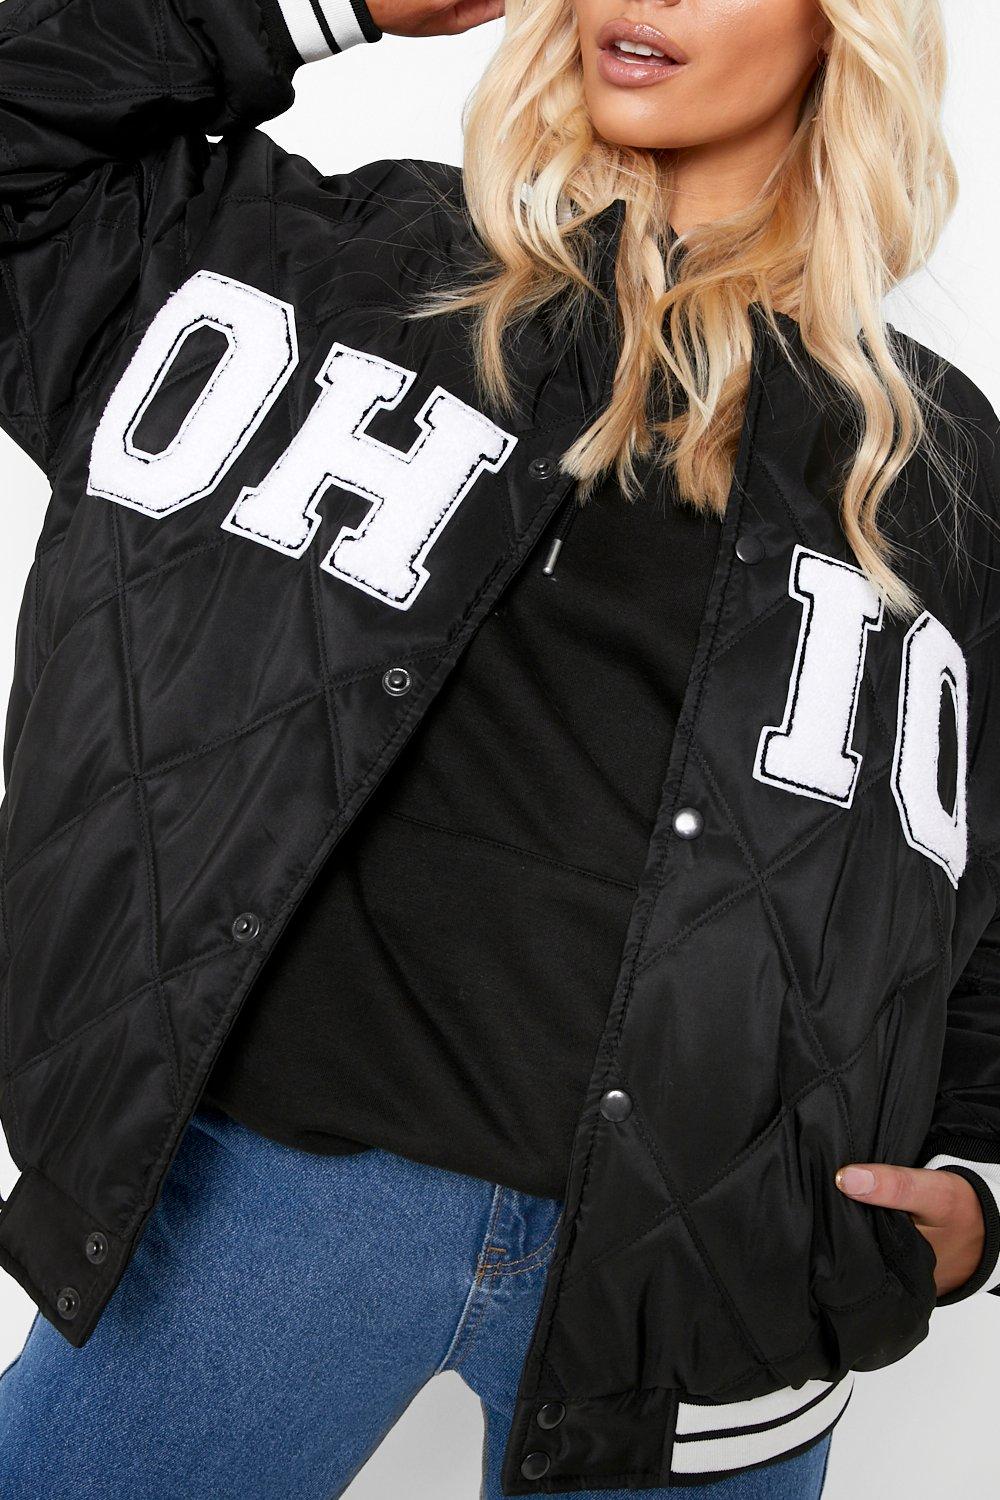  Varsity Jacket 2 Piece Sets for Women Faux Leather Skirt Bomber  Baseball Jackets Outfit Black : Clothing, Shoes & Jewelry